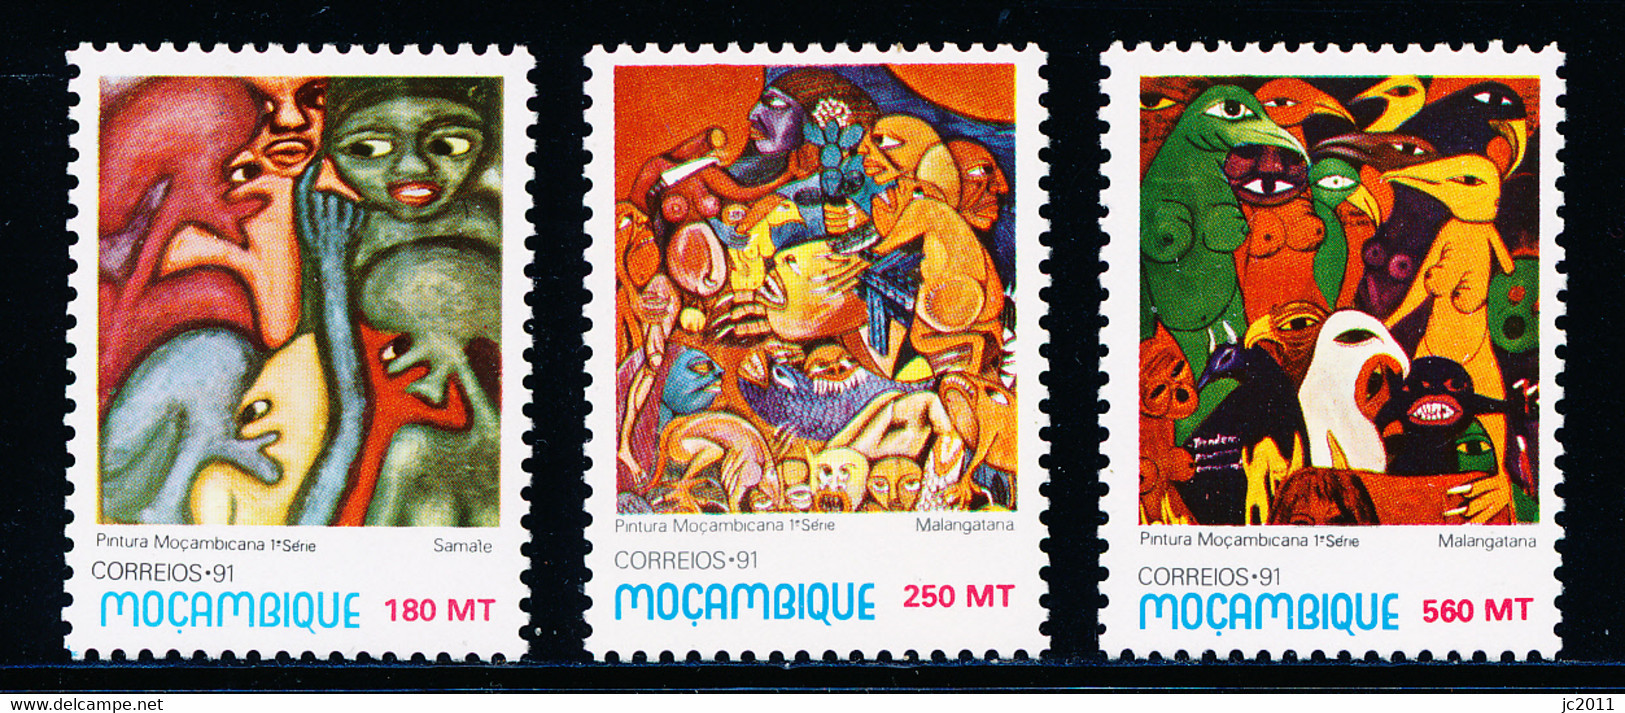 Mozambique - 1991 - Paintings By Mozambican Artists - MNH - Mozambique